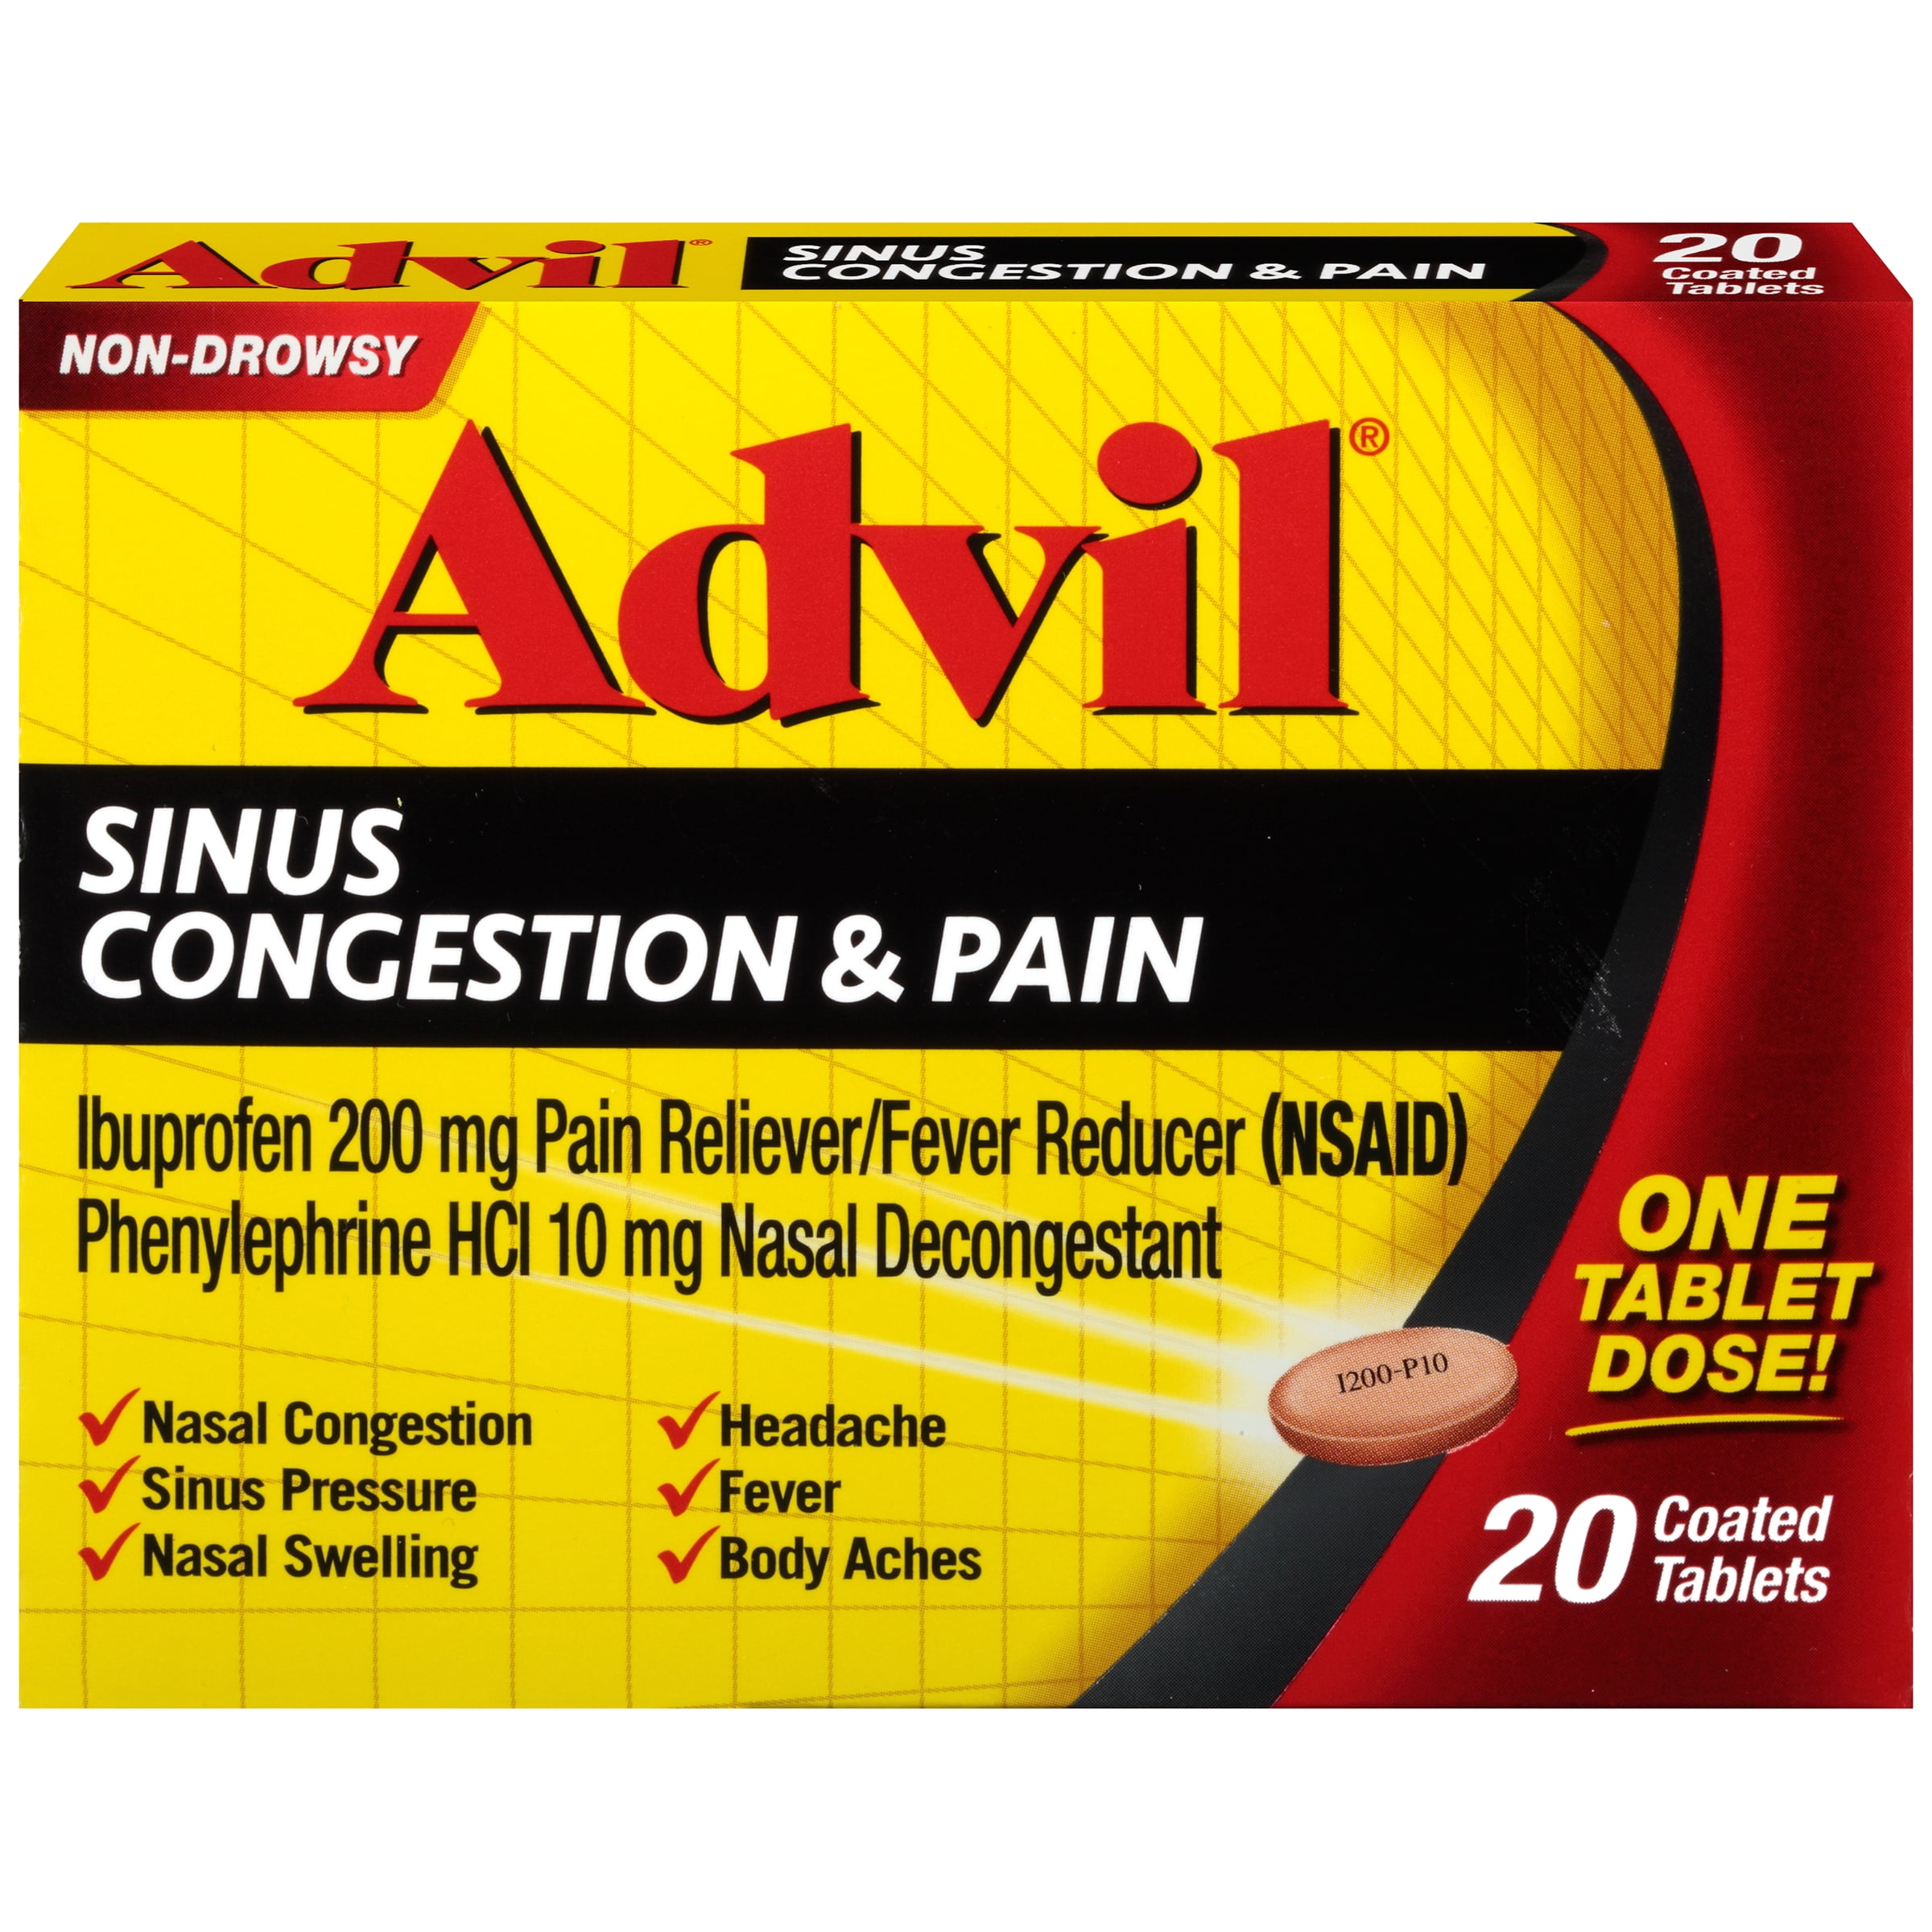 advil-sinus-congestion-pain-relief-pain-fever-reducer-20-ct